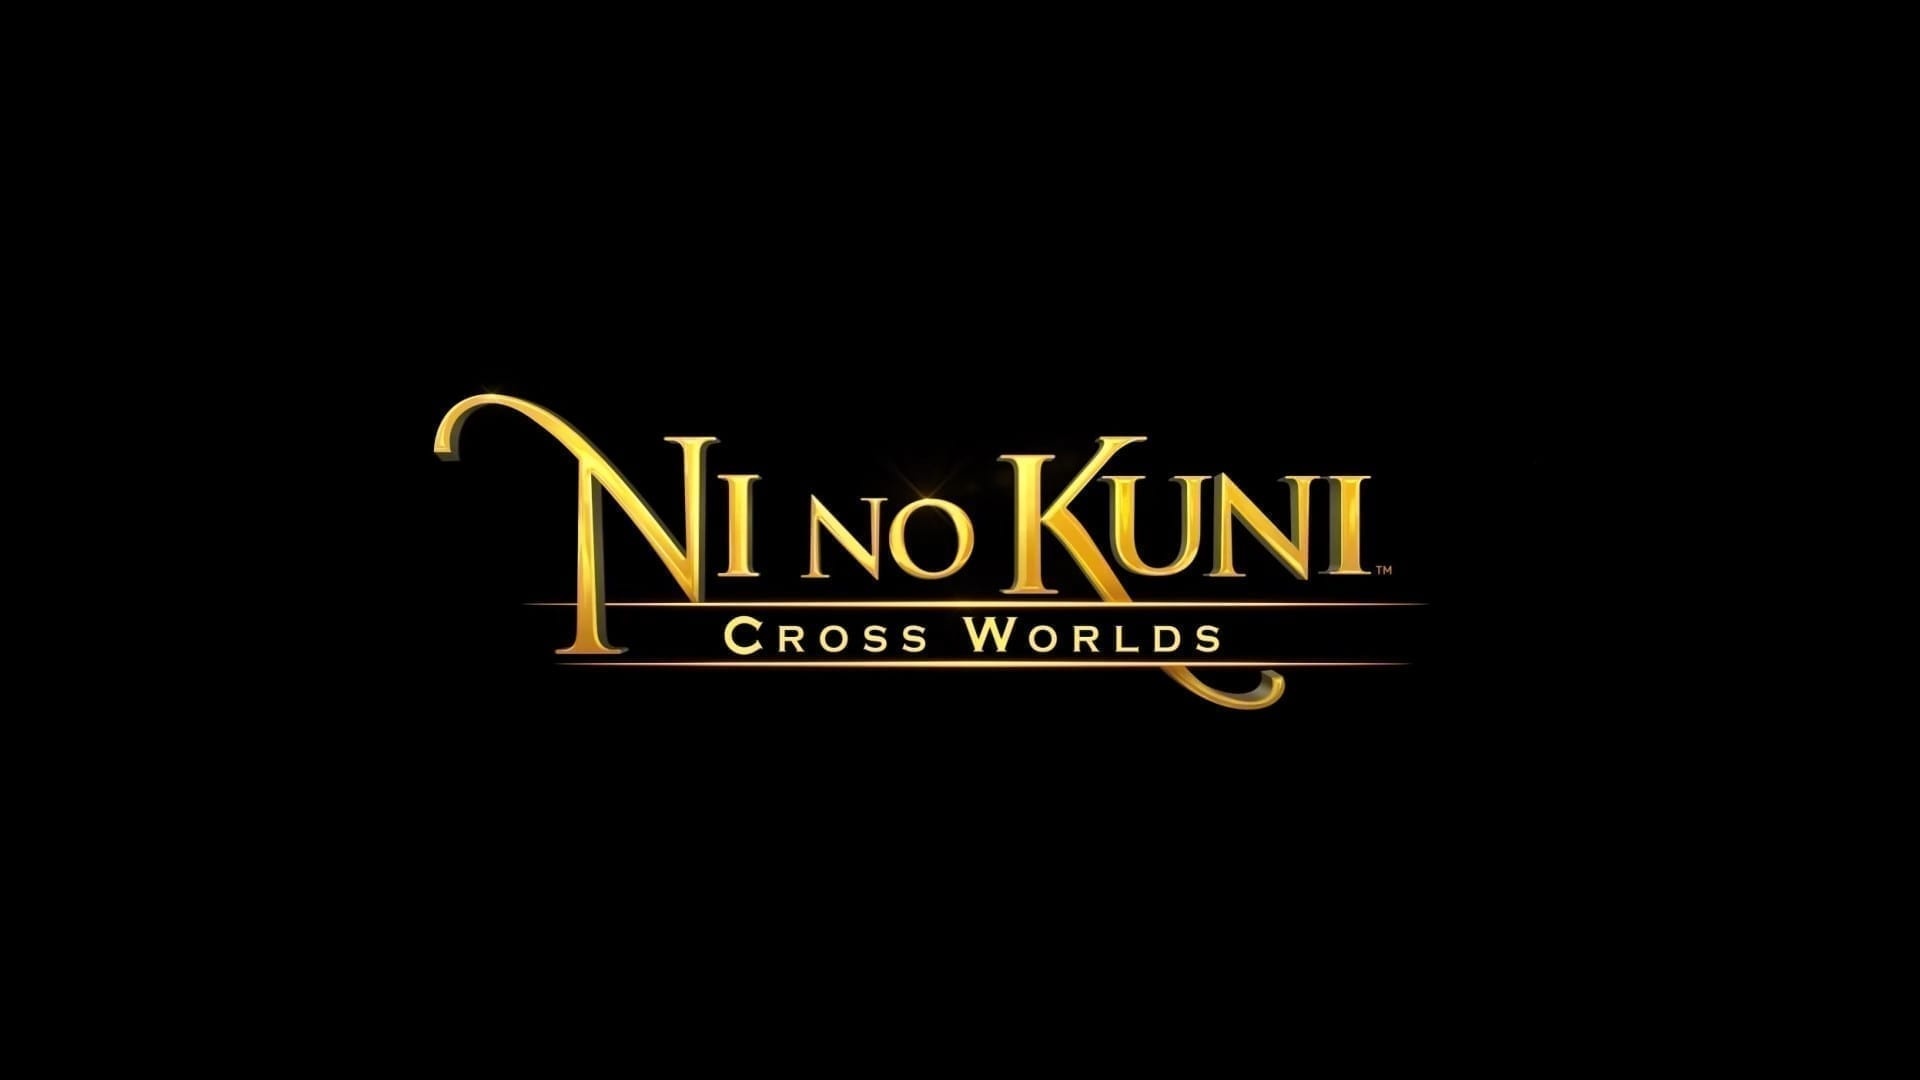 Ni no Kuni: Cross Worlds: A free-to-play role-playing video game developed by Netmarble. 1920x1080 Full HD Wallpaper.